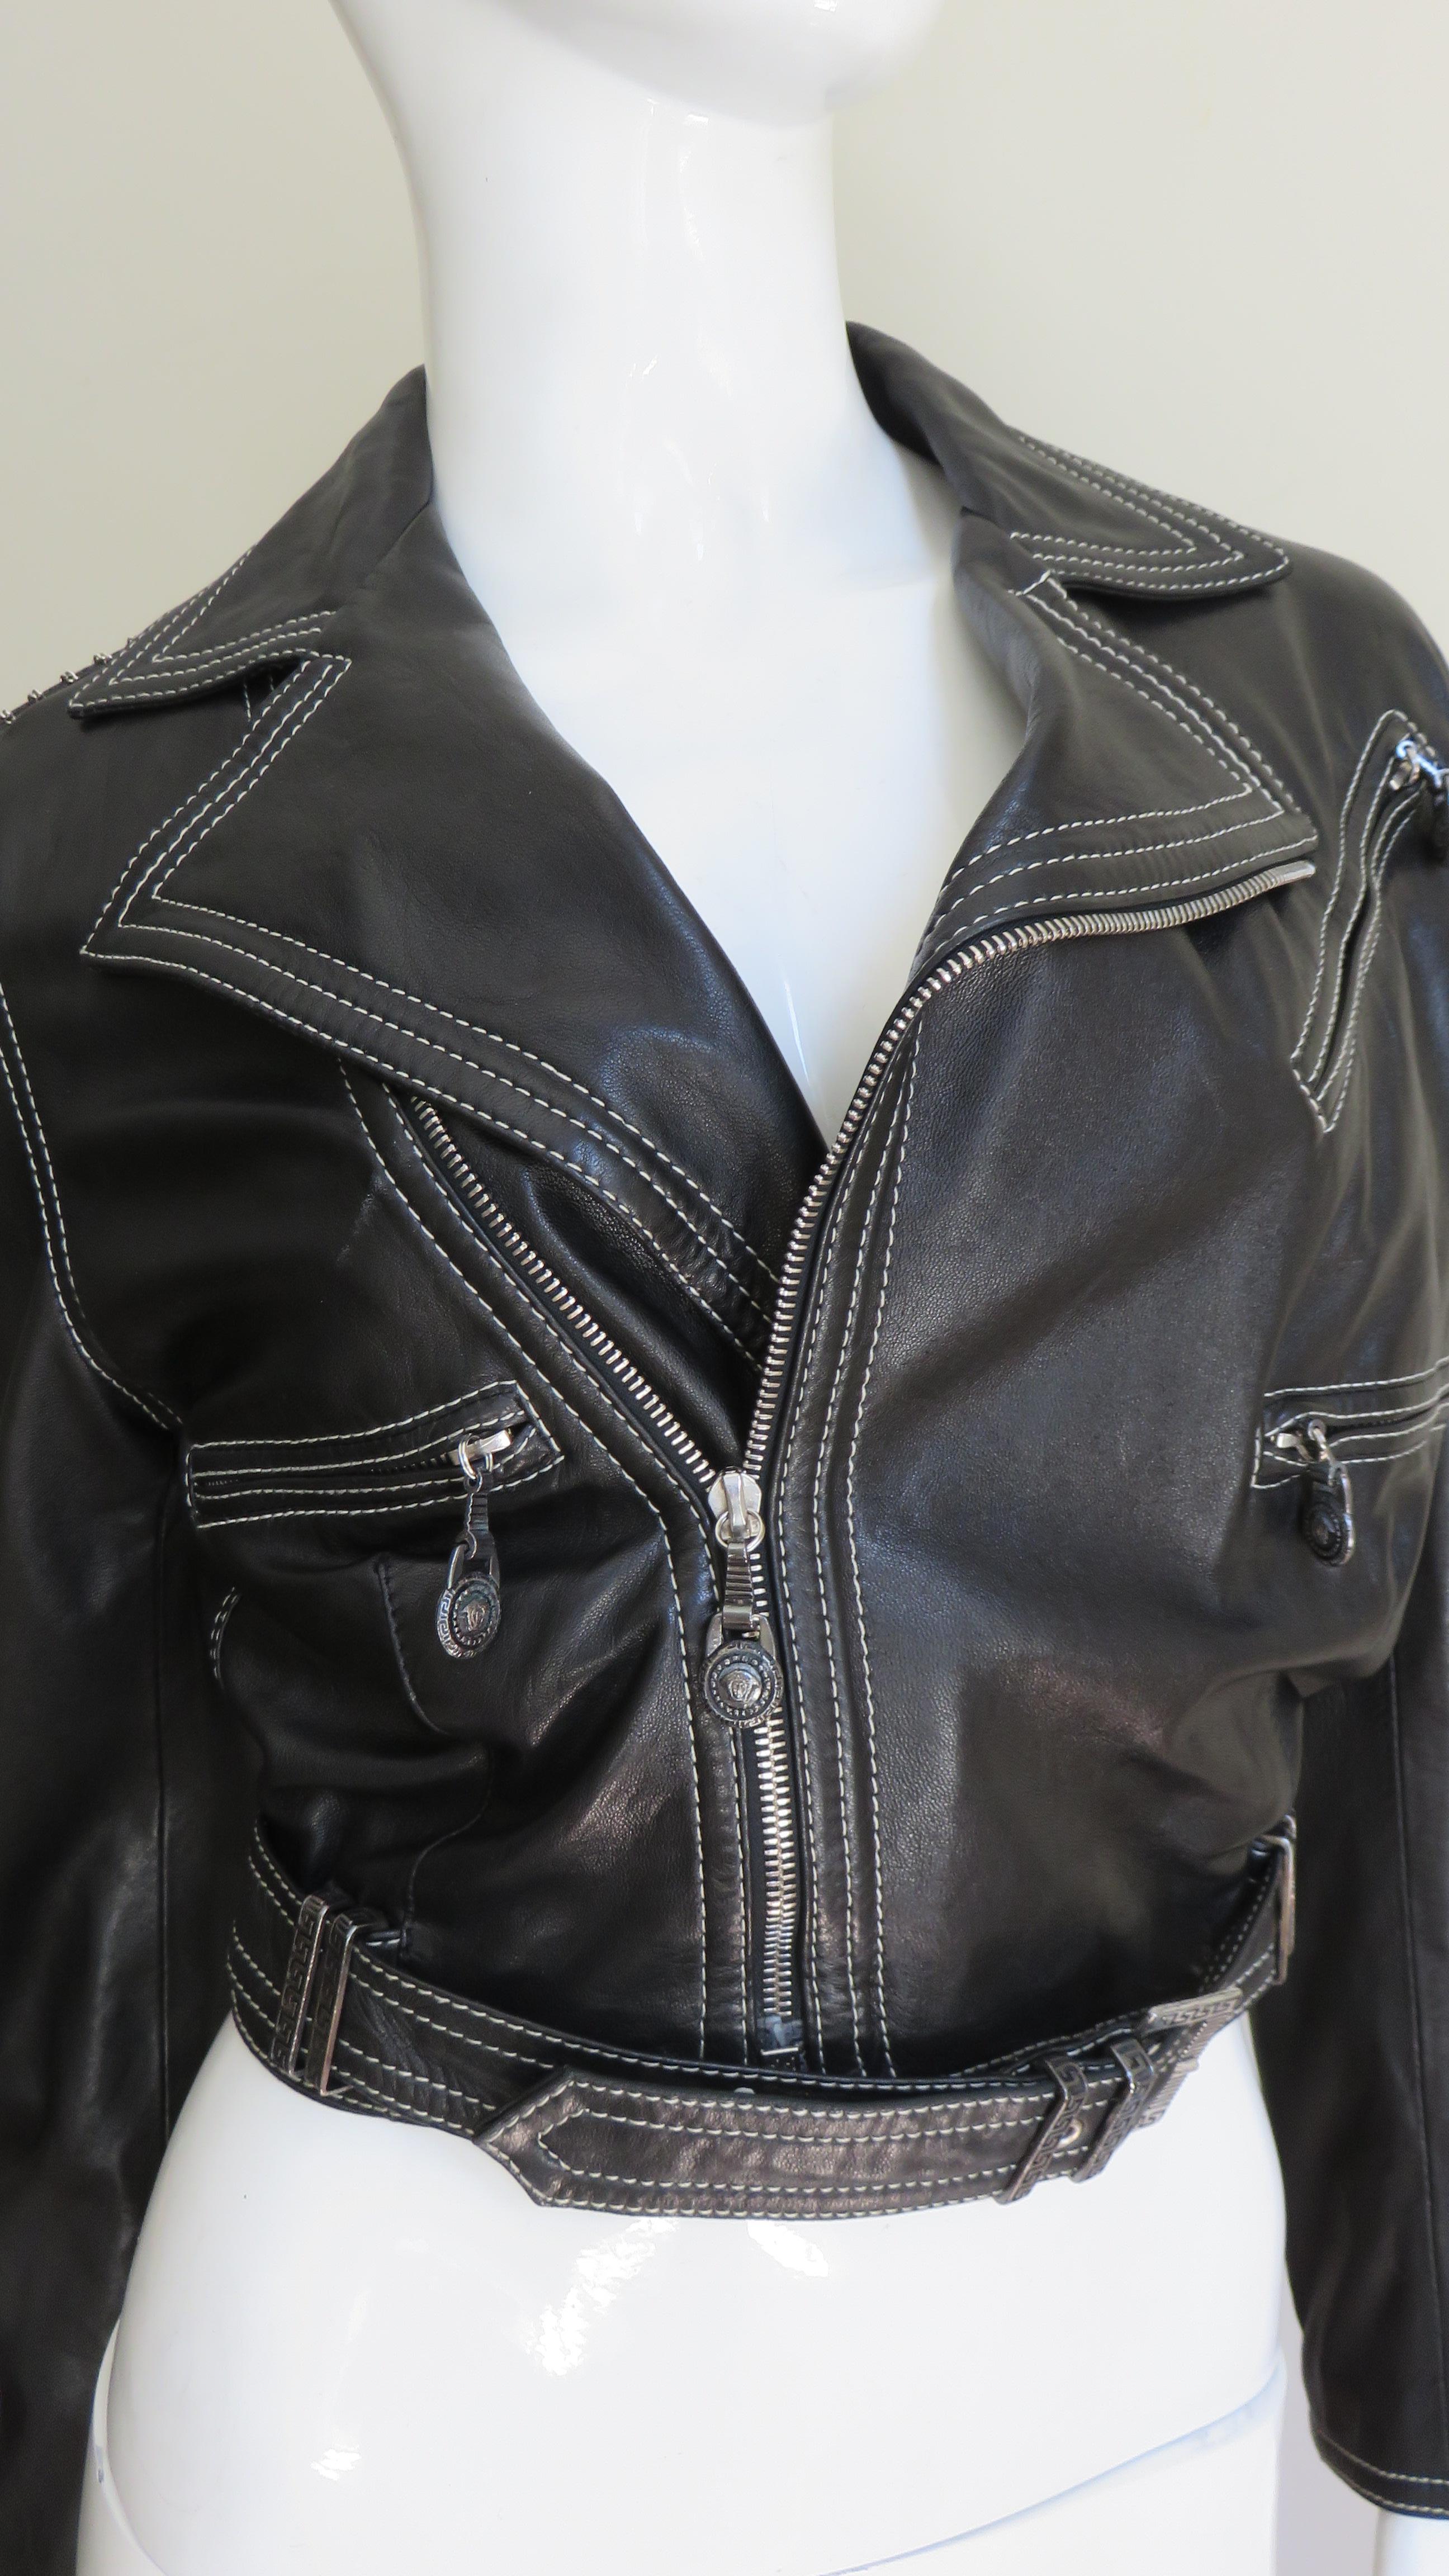 Black  Gianni Versace A/W 1992 Leather Motorcycle Jacket and Pants With Chain Trim  For Sale